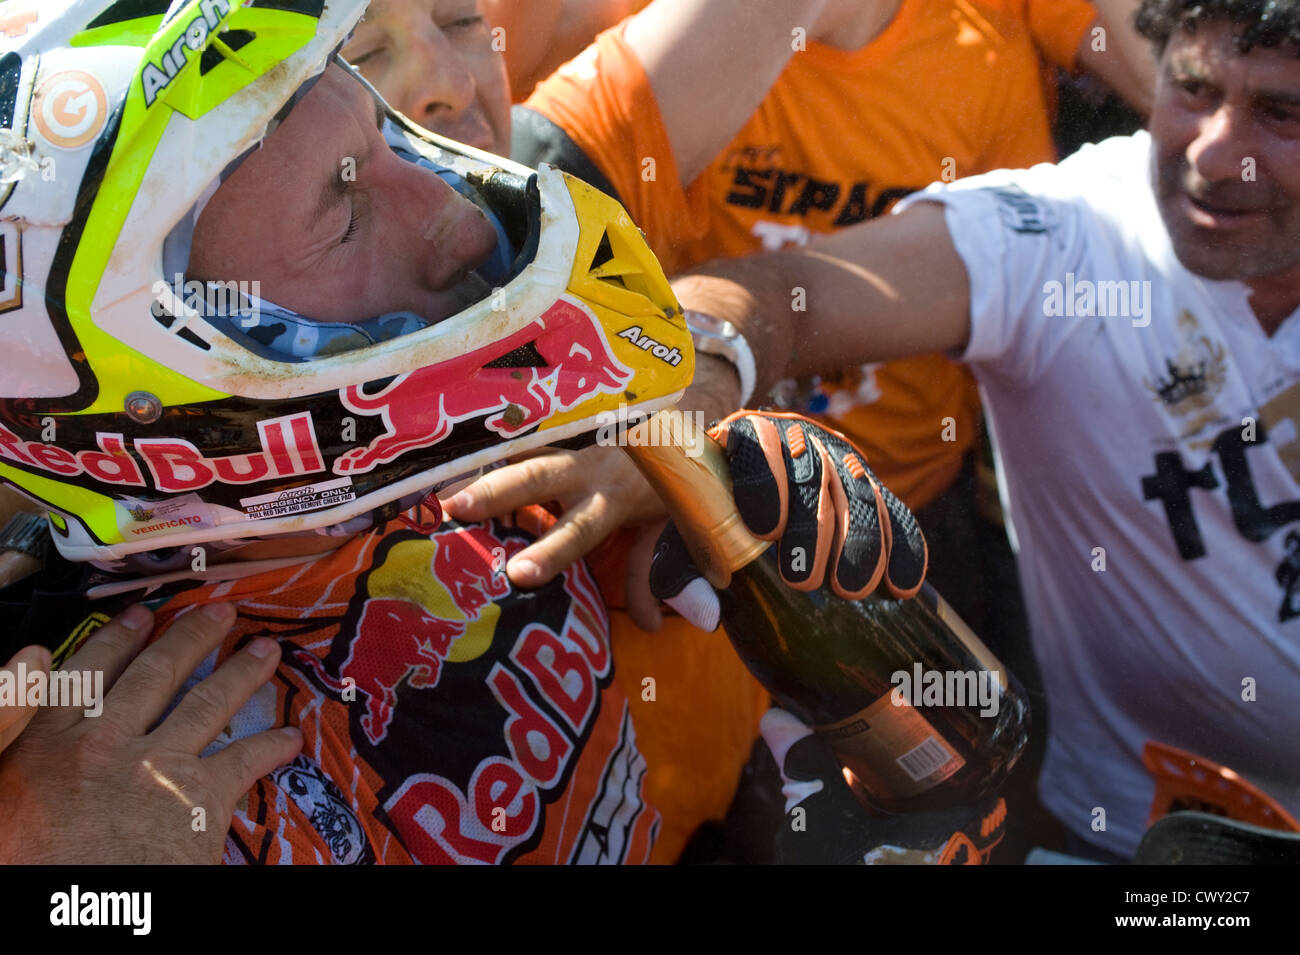 222 Antonio (Toni) Cairoli celebrate the the first place at race 1 of MX1 Stock Photo